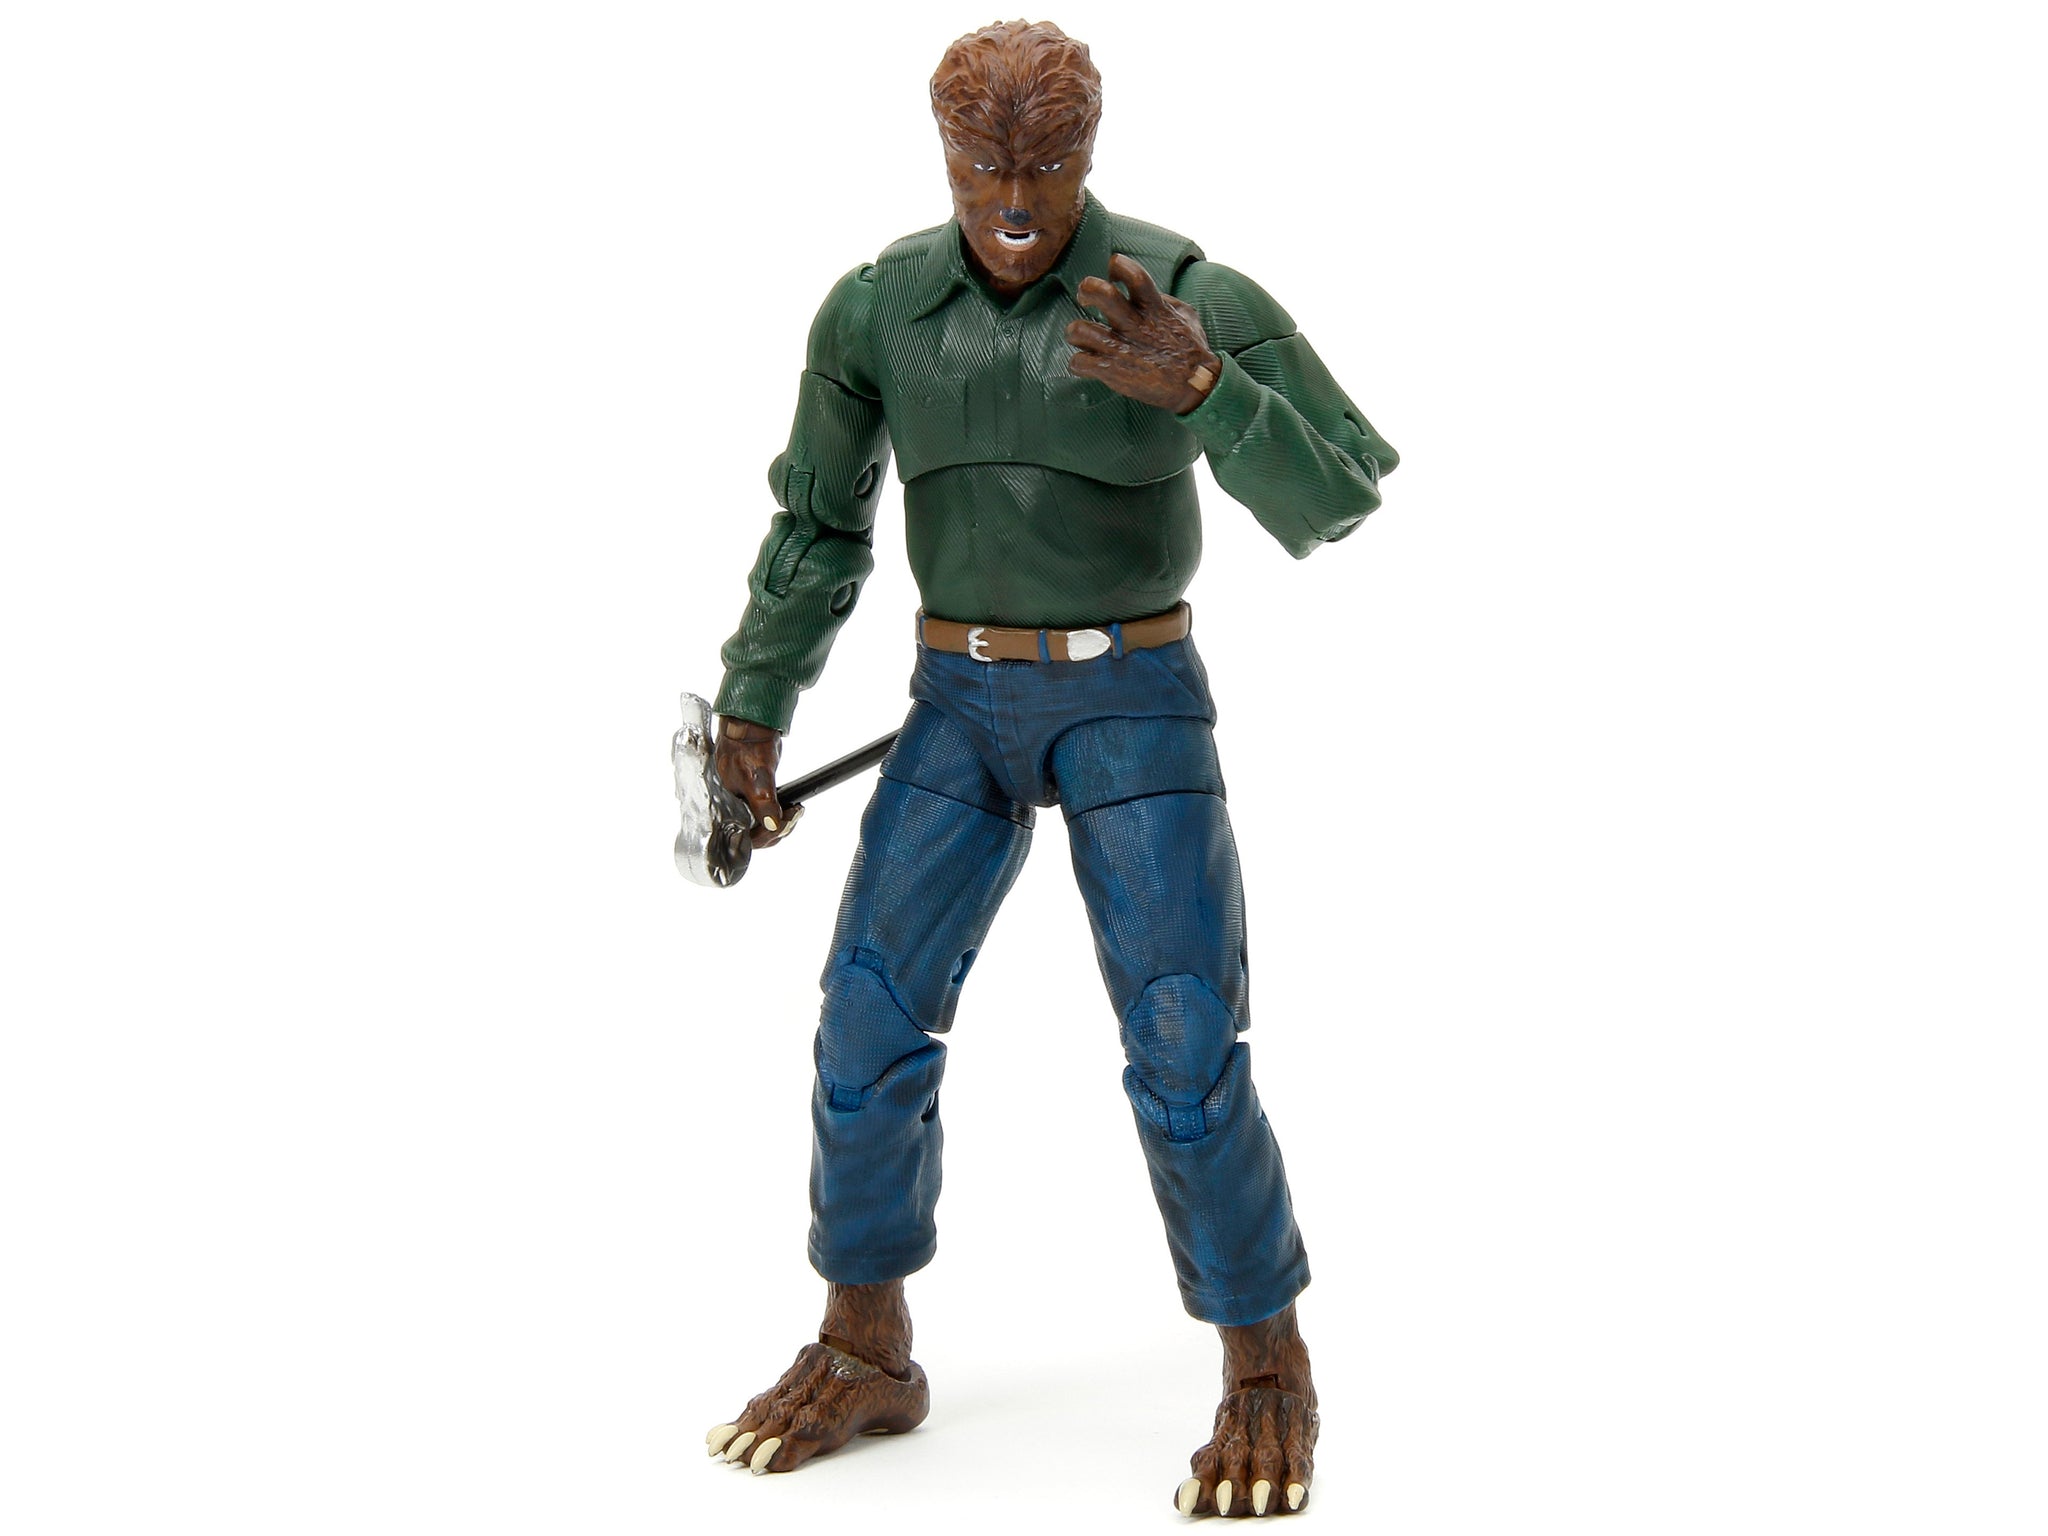 The Wolfman 6.25" Moveable Figure with Cane Trap and Alternate Head and Hands "Universal Monsters" Series by Jada